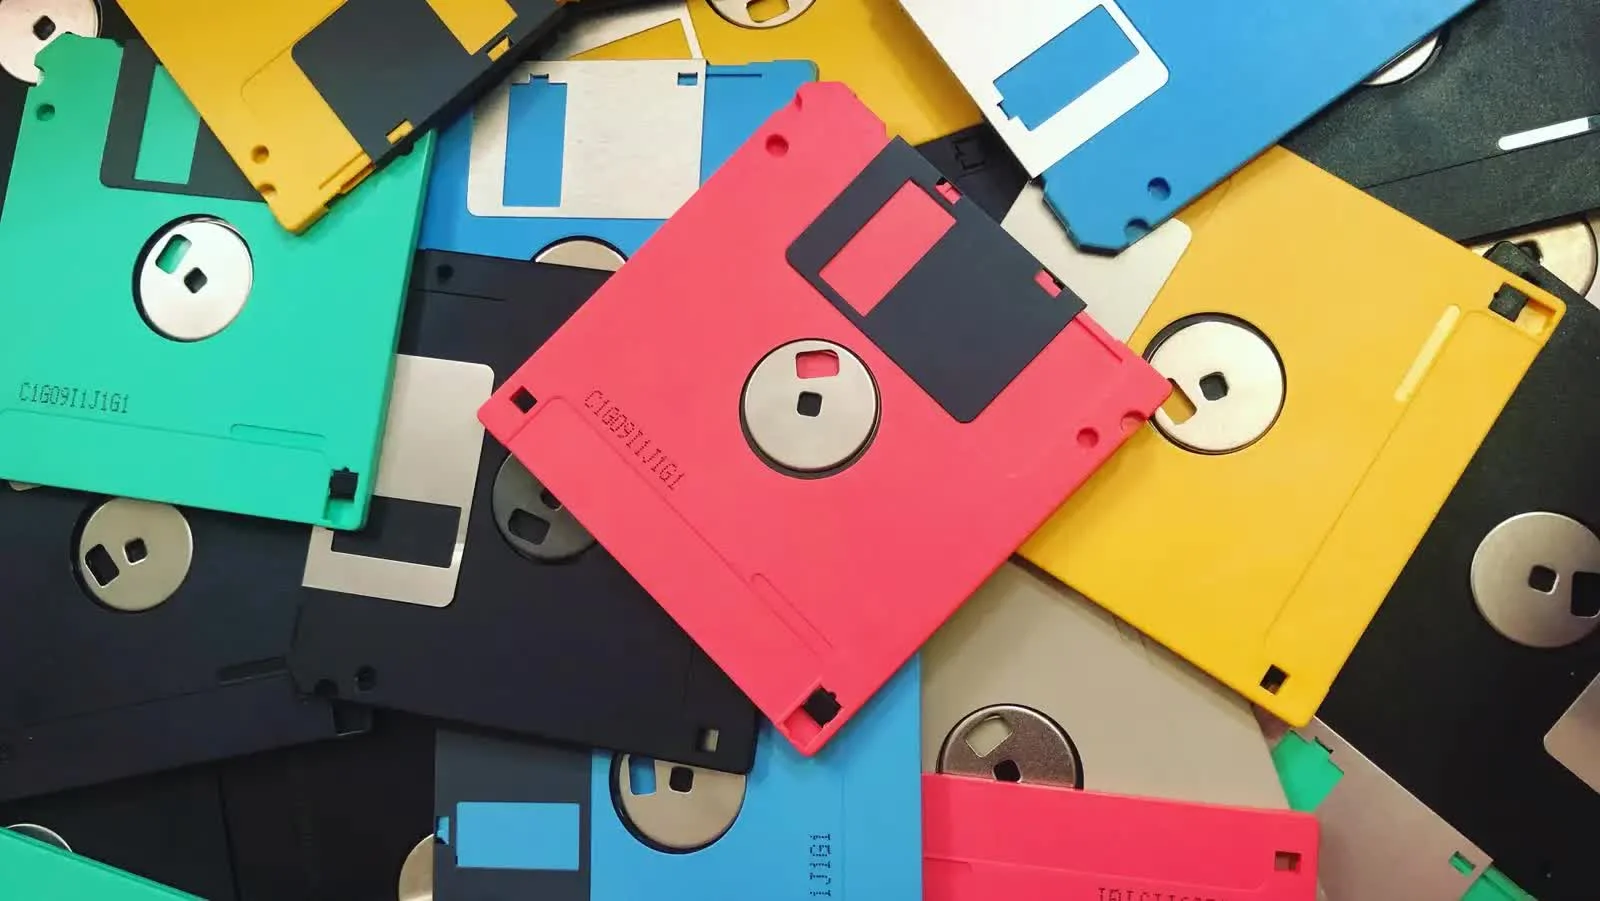 The Japanese still use floppy disks and CDs. What for?